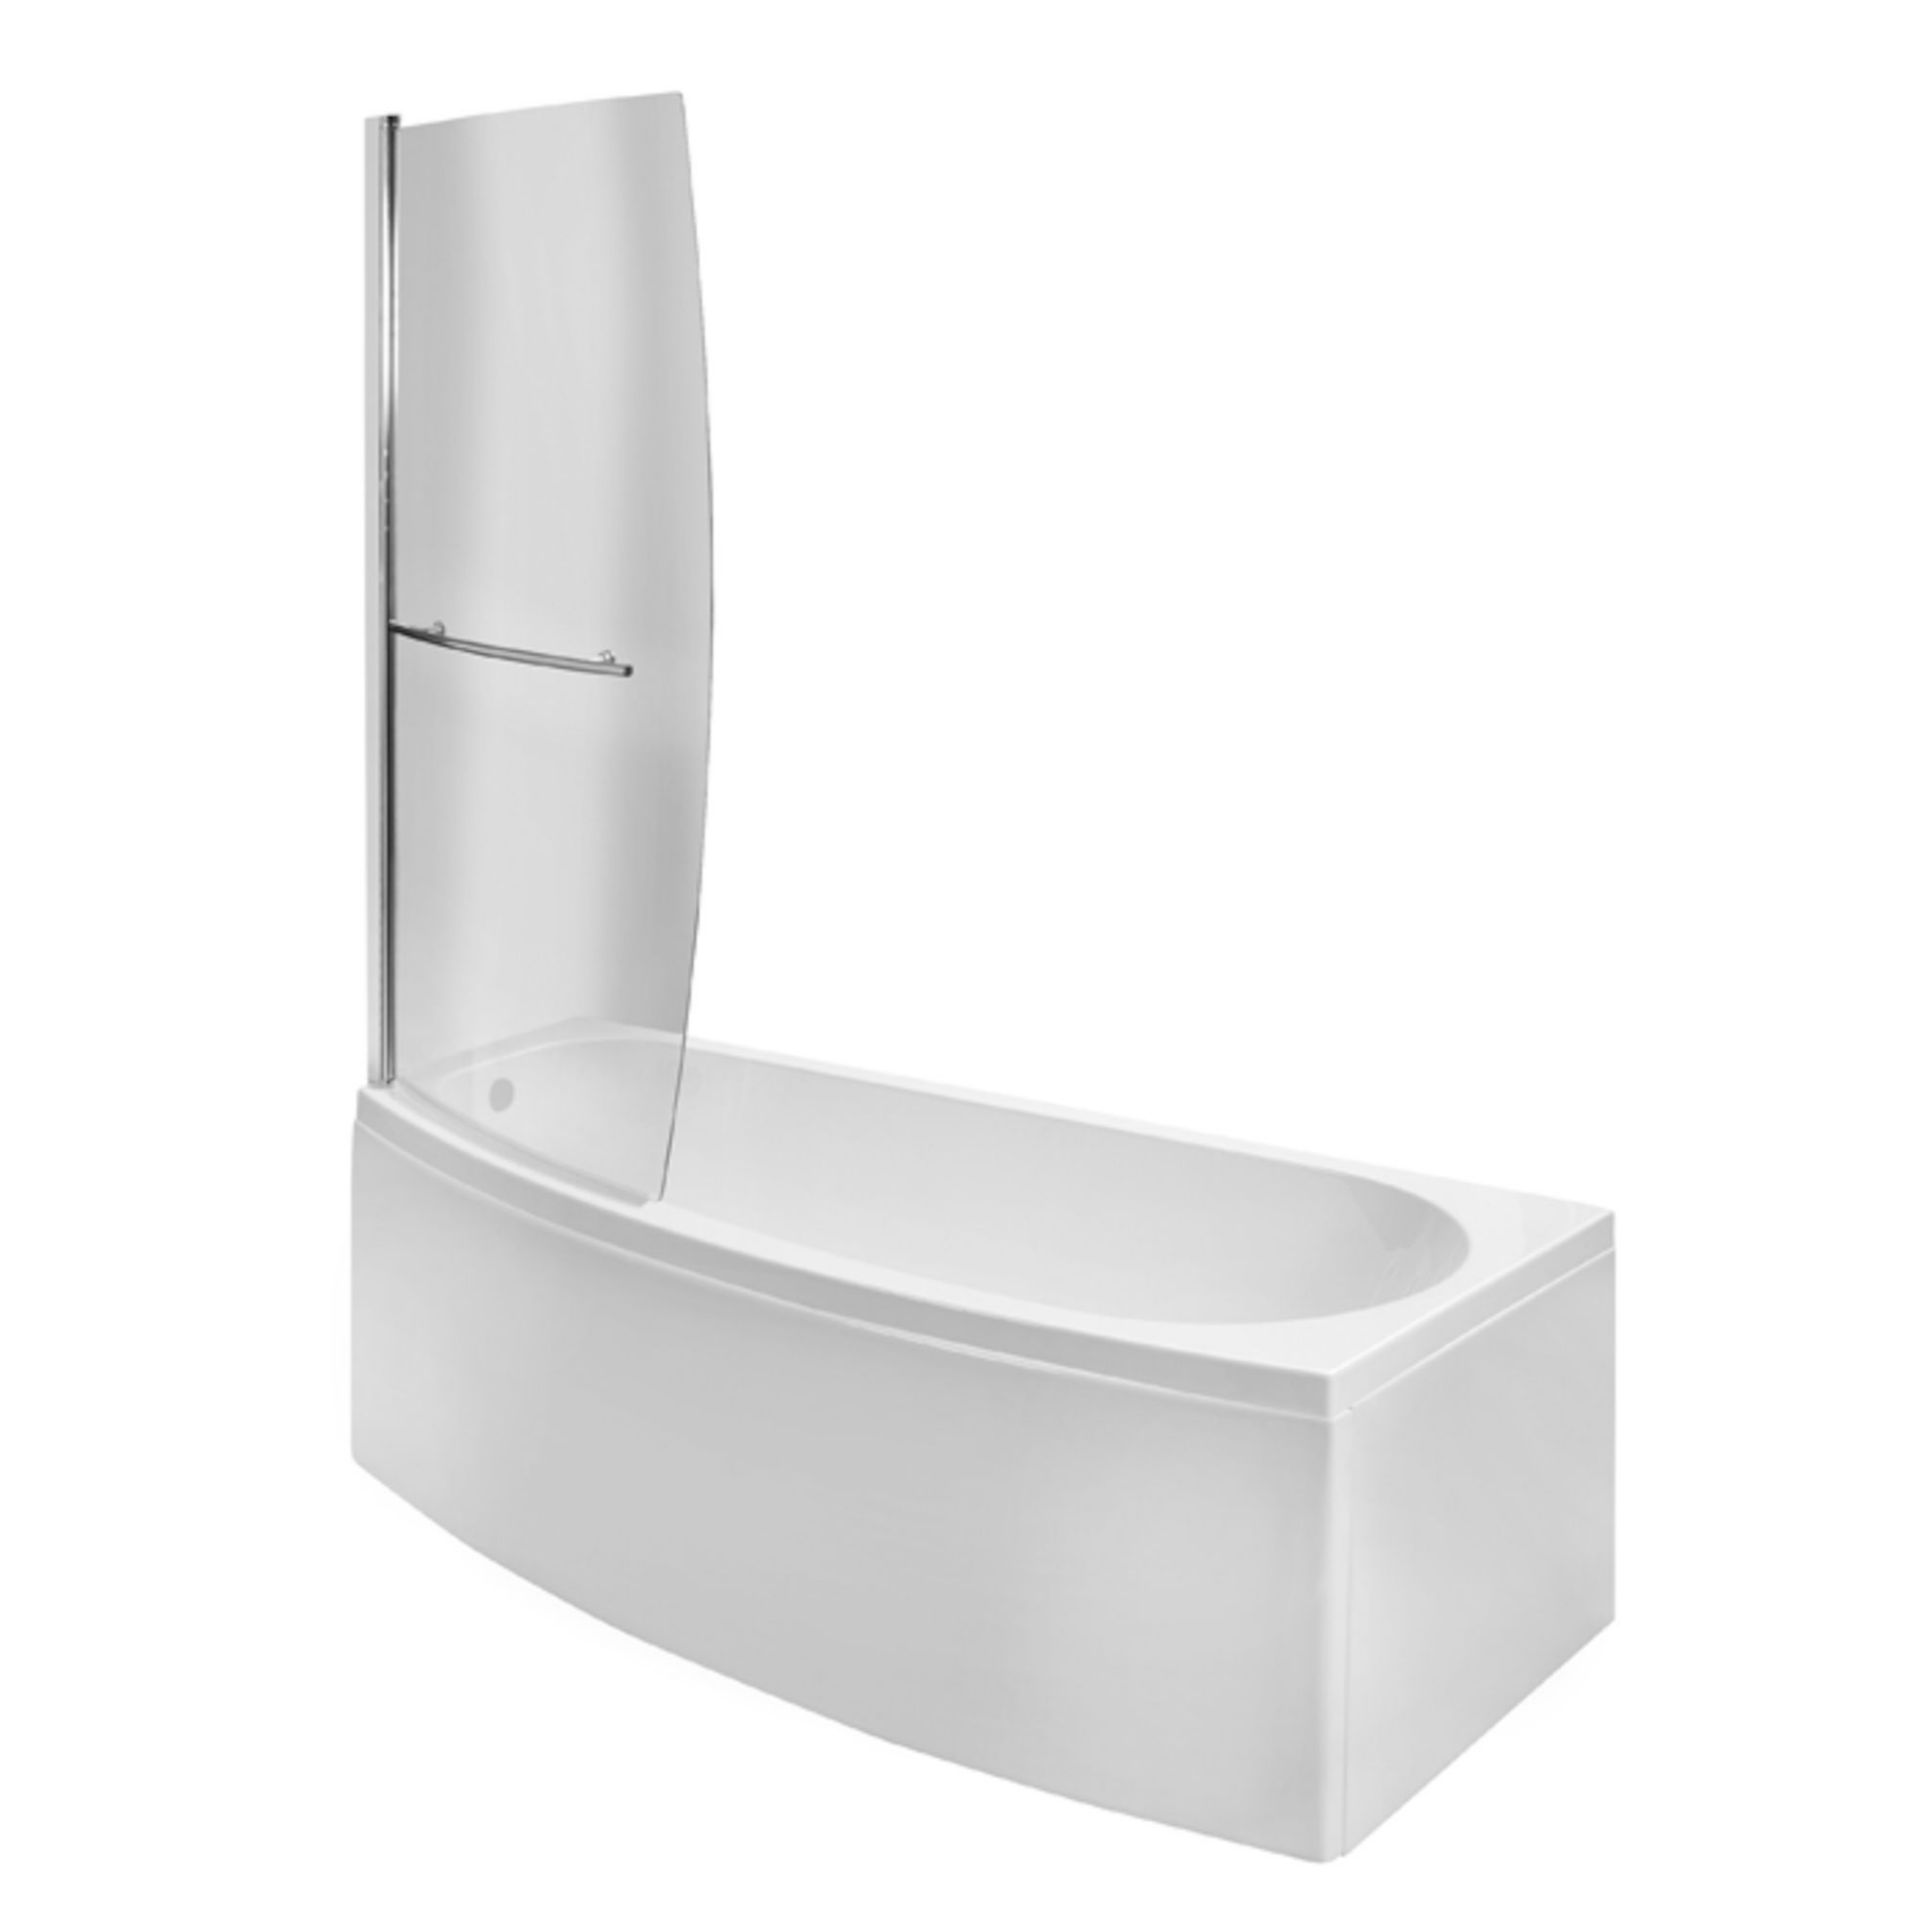 (TY173) 1700mm Left Hand Space Saver Shower Bath, Screen, Rail & Front Panel (Excludes End Panel). - Image 2 of 3